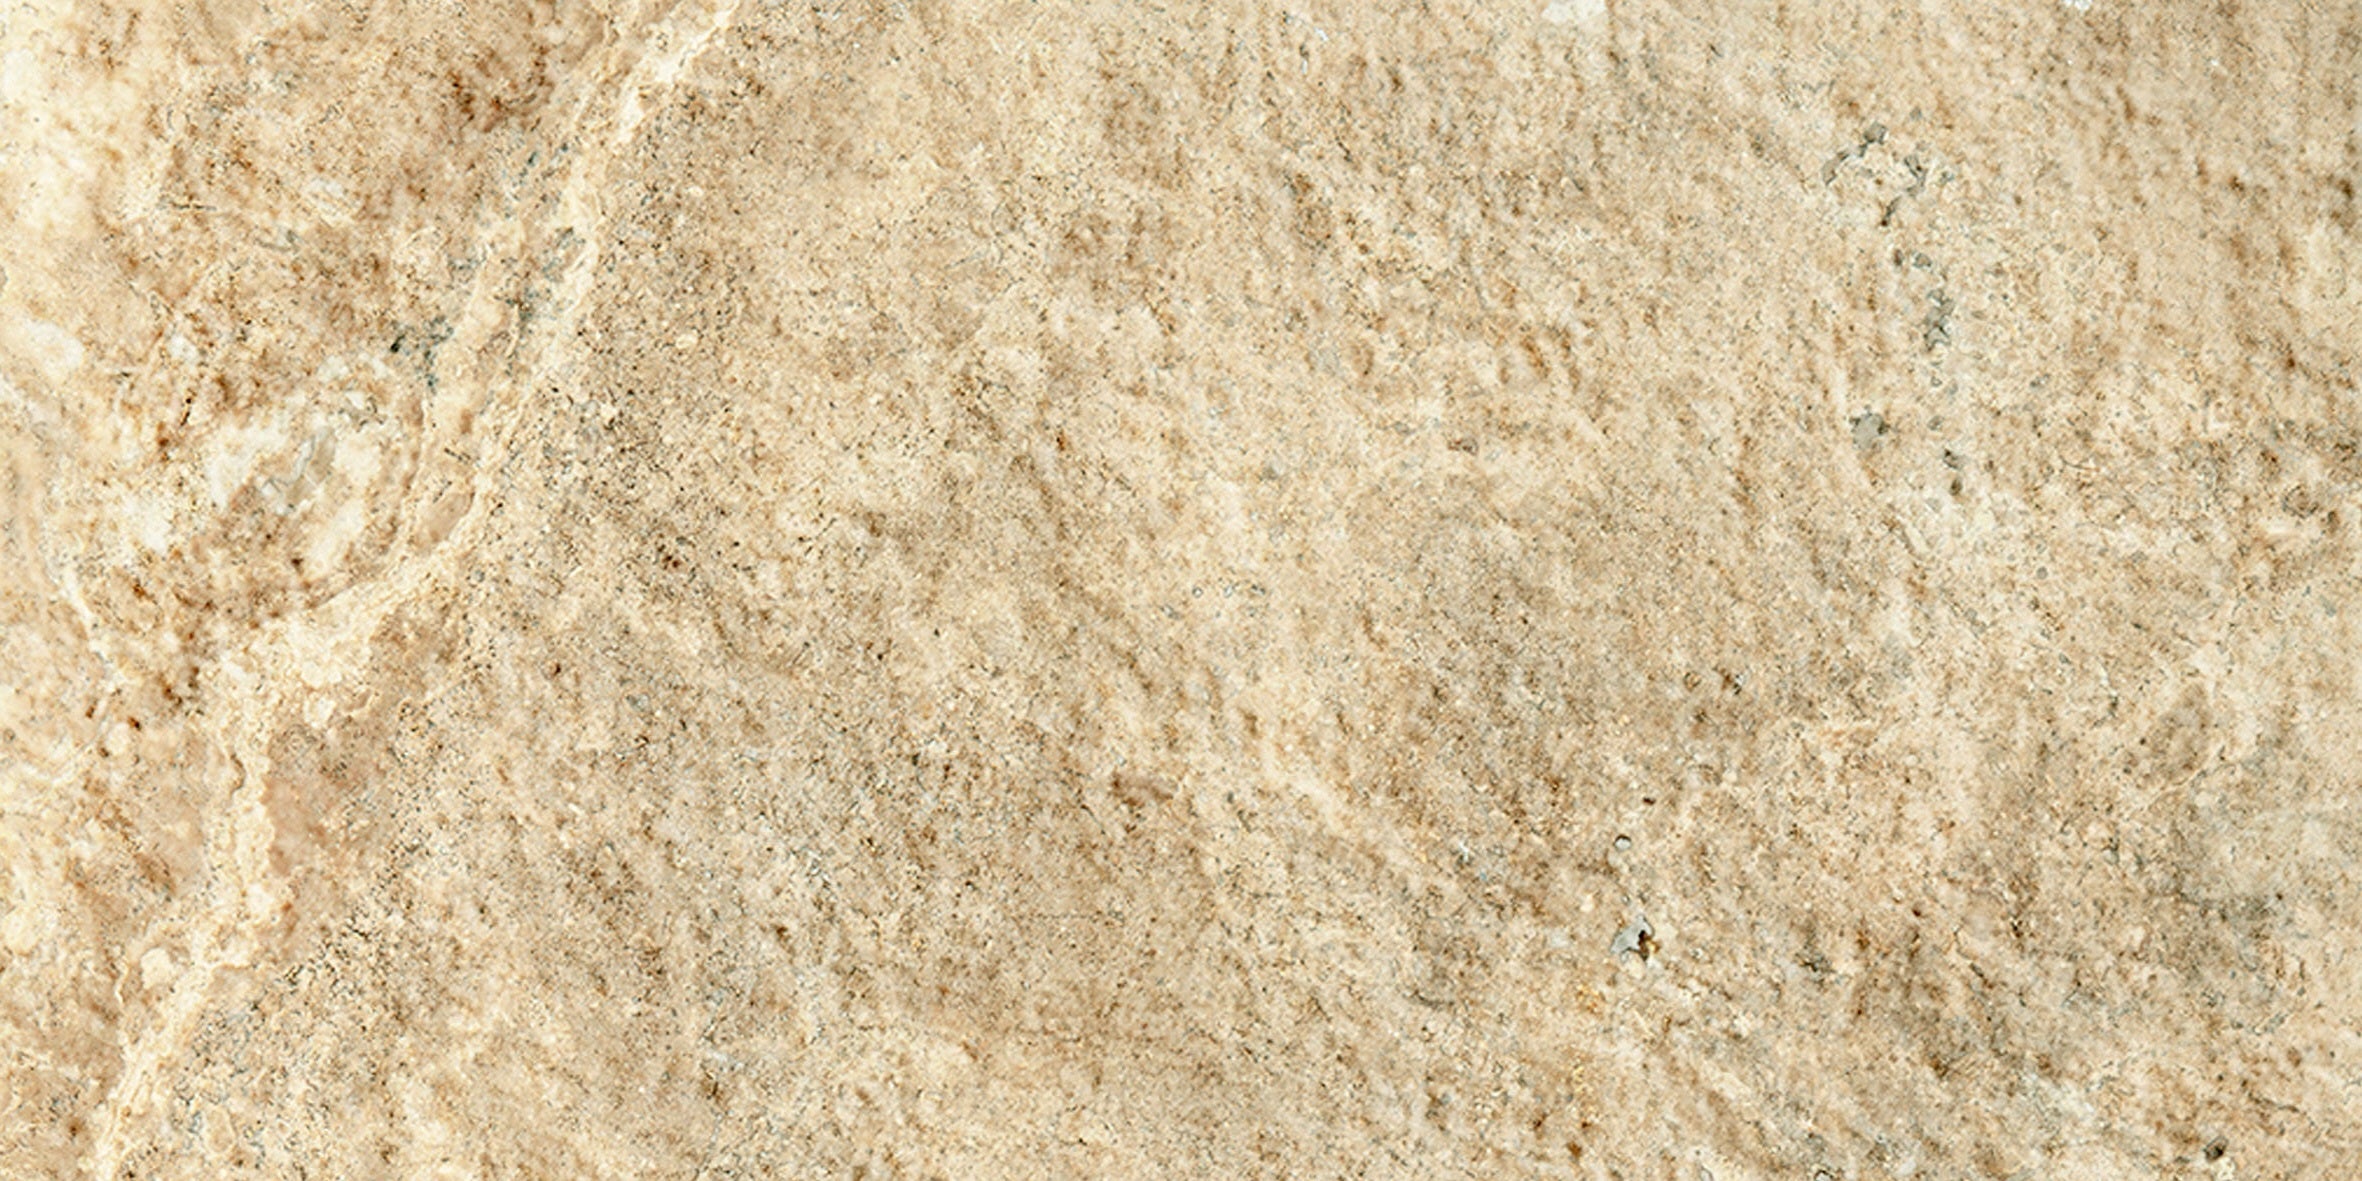 landmark frontier20 travertine cross cut cream paver tile 24x48x20mm matte rectified porcelain tile distributed by surface group international